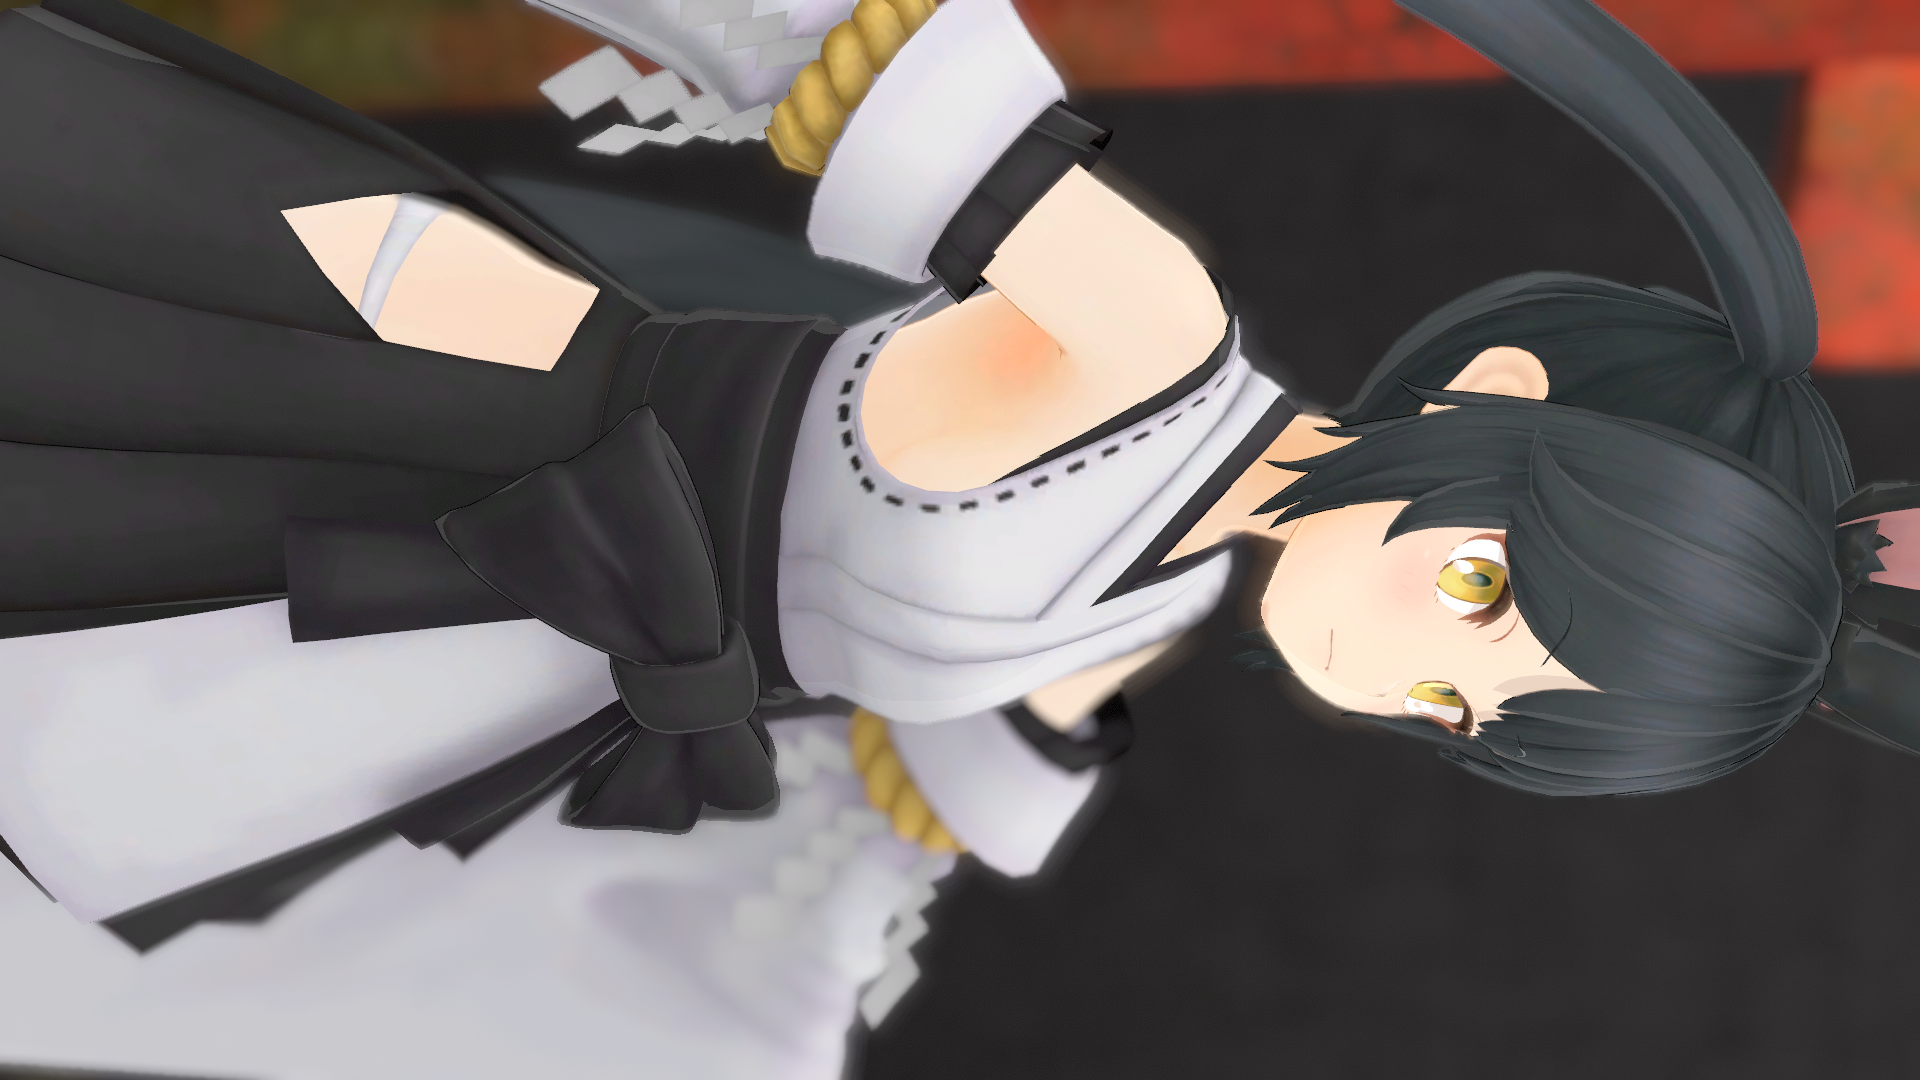 VRChat_1920x1080_2021-12-05_05-30-13.990.png